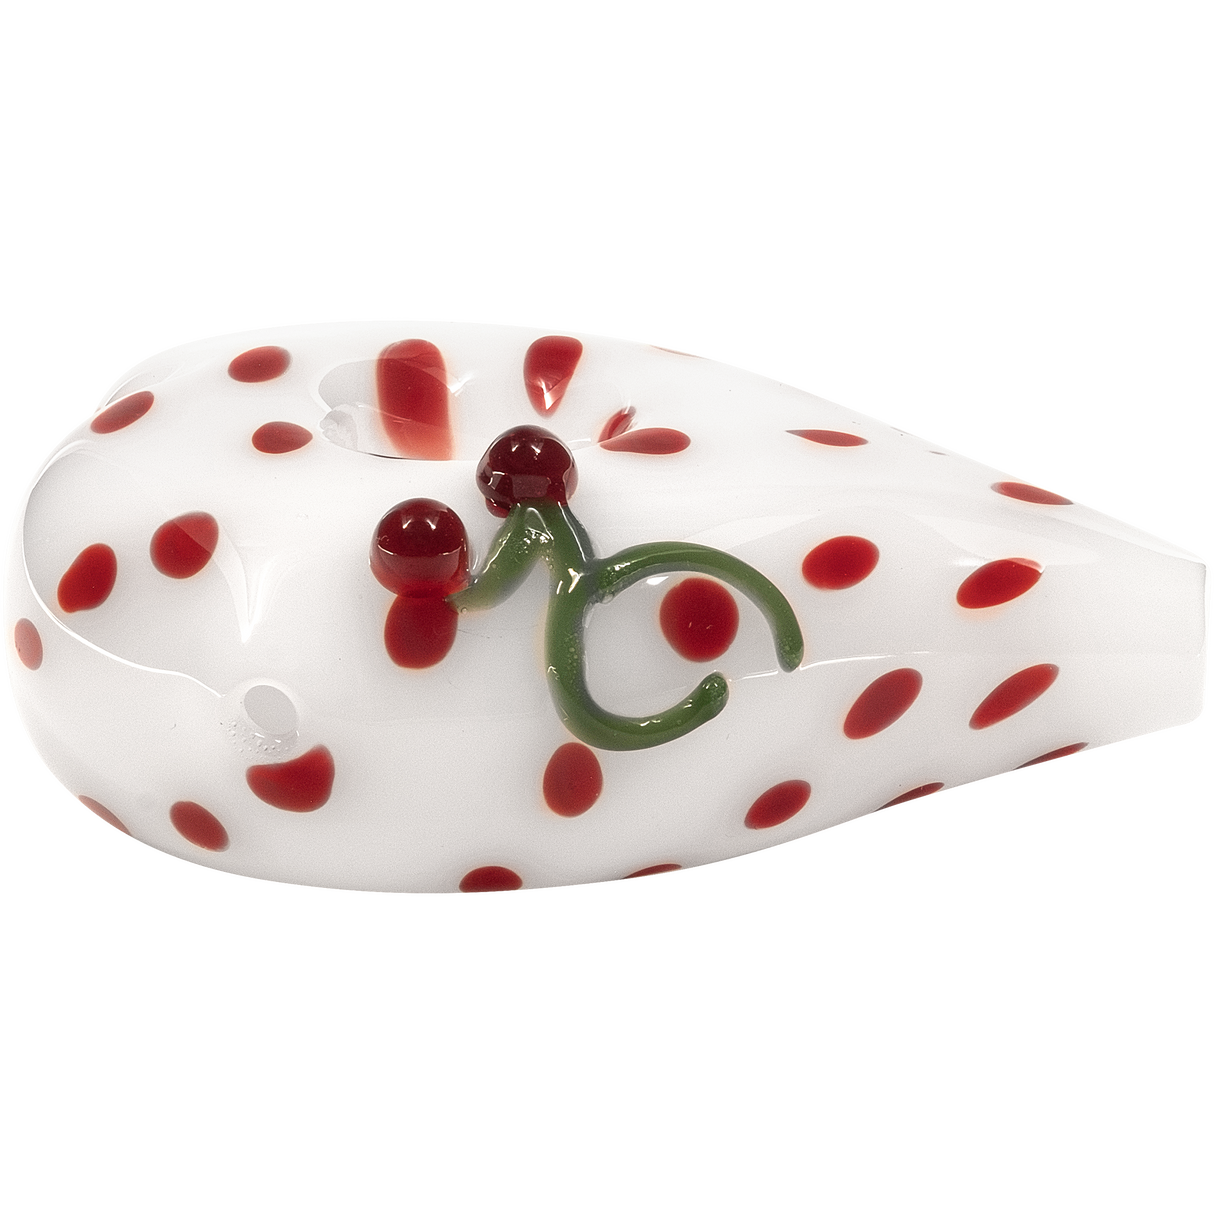 LA Pipes White Heart-Shaped Hand Pipe with Red Dots, Borosilicate Glass, Side View